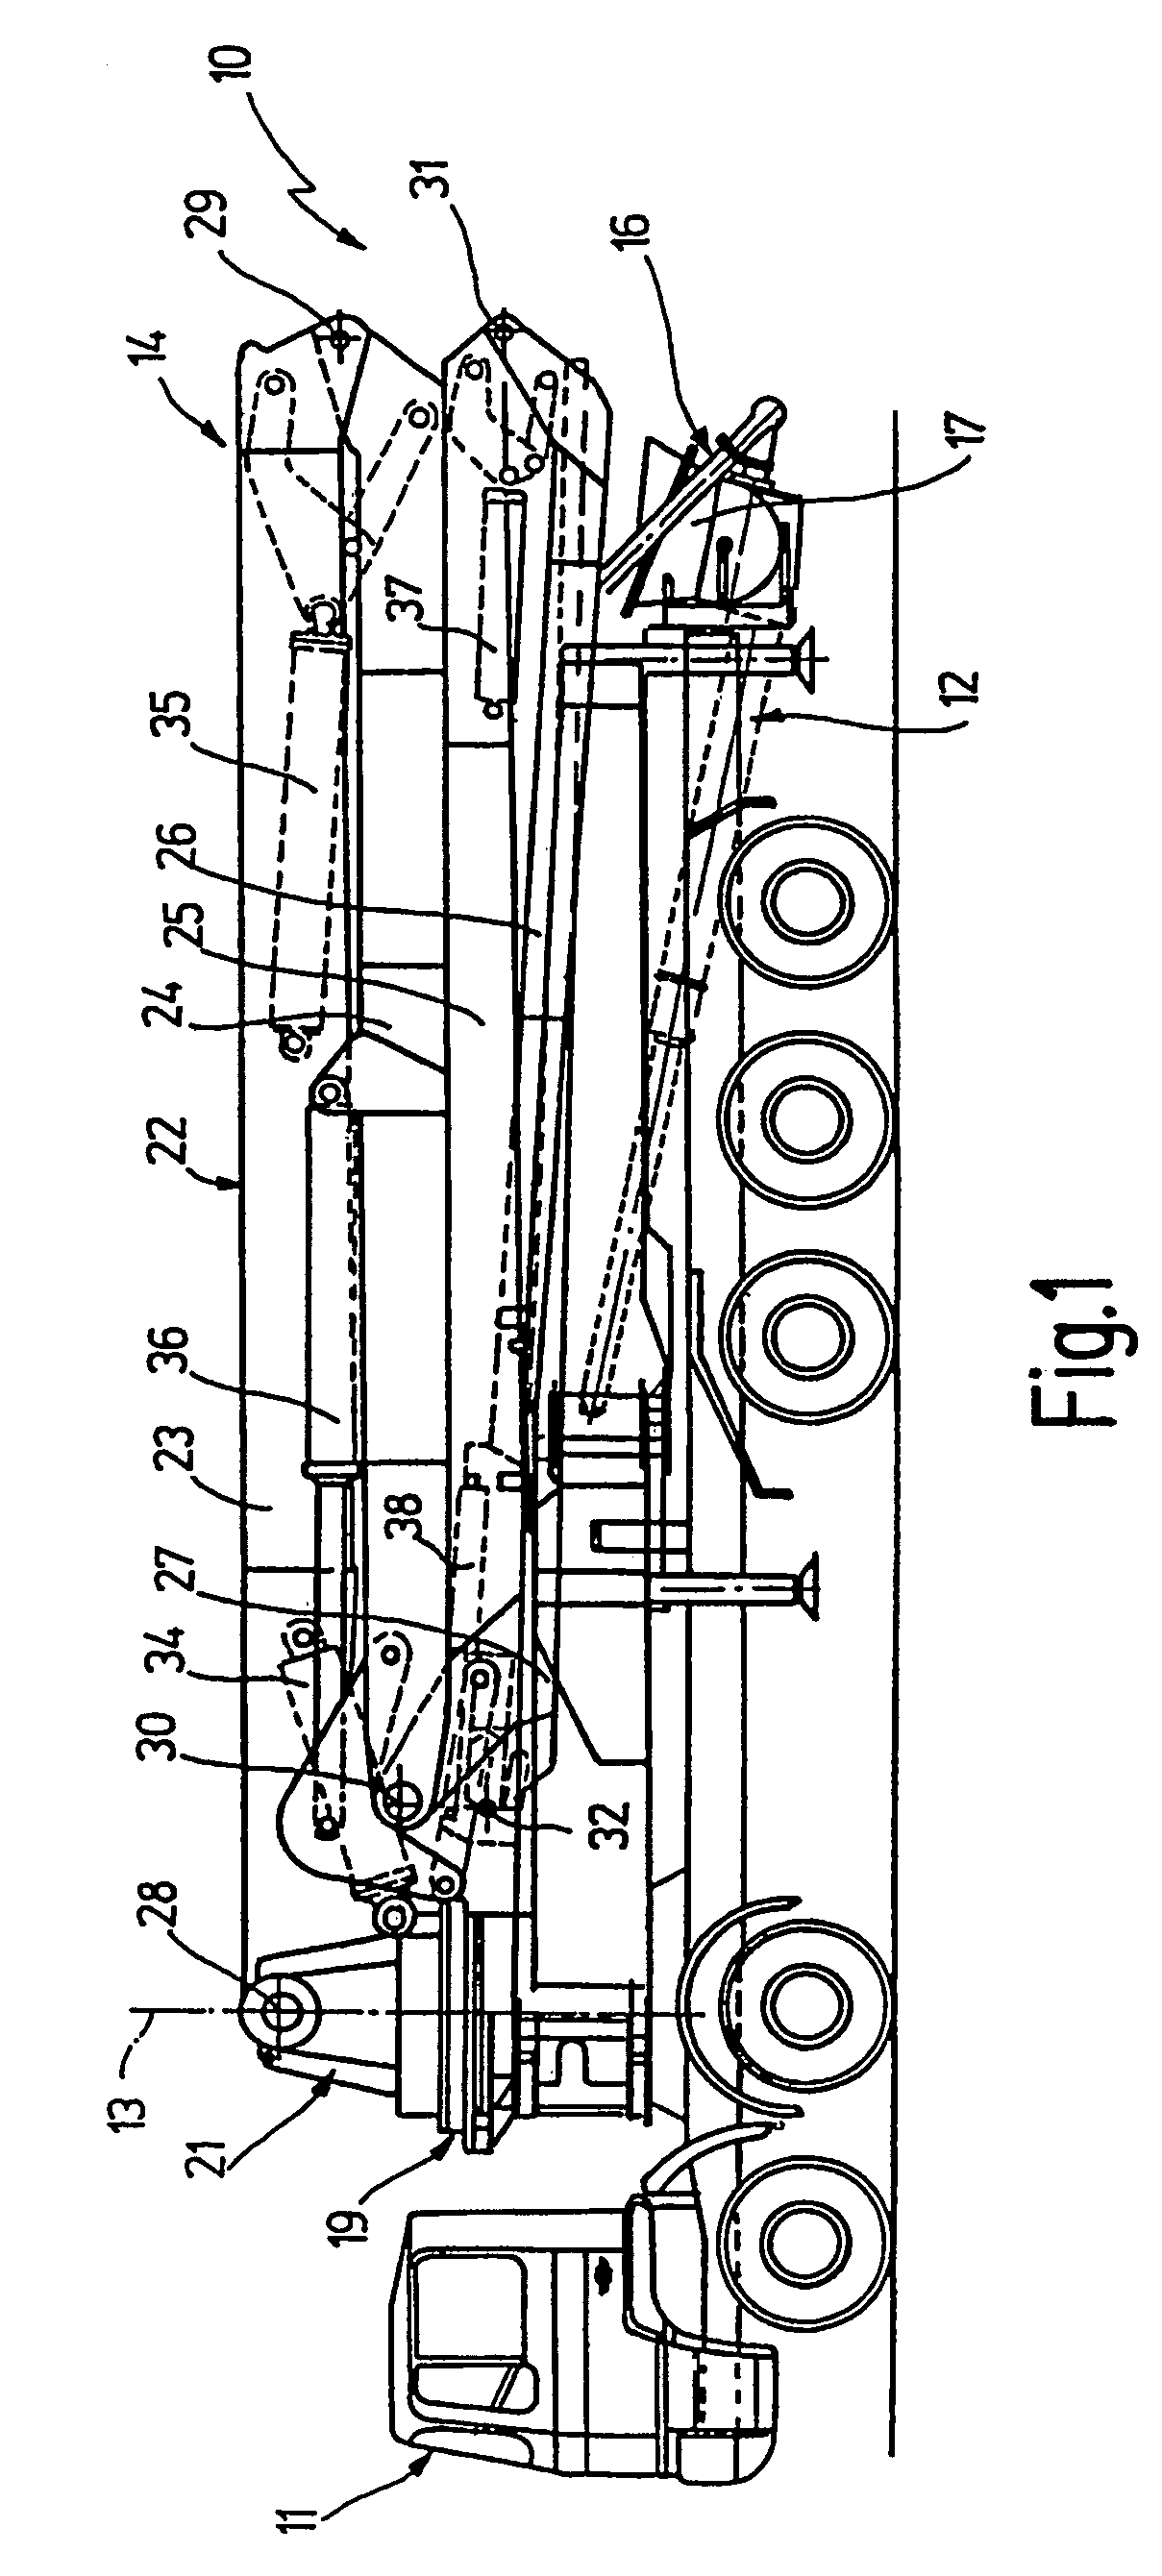 Device for actuating an articulated mast